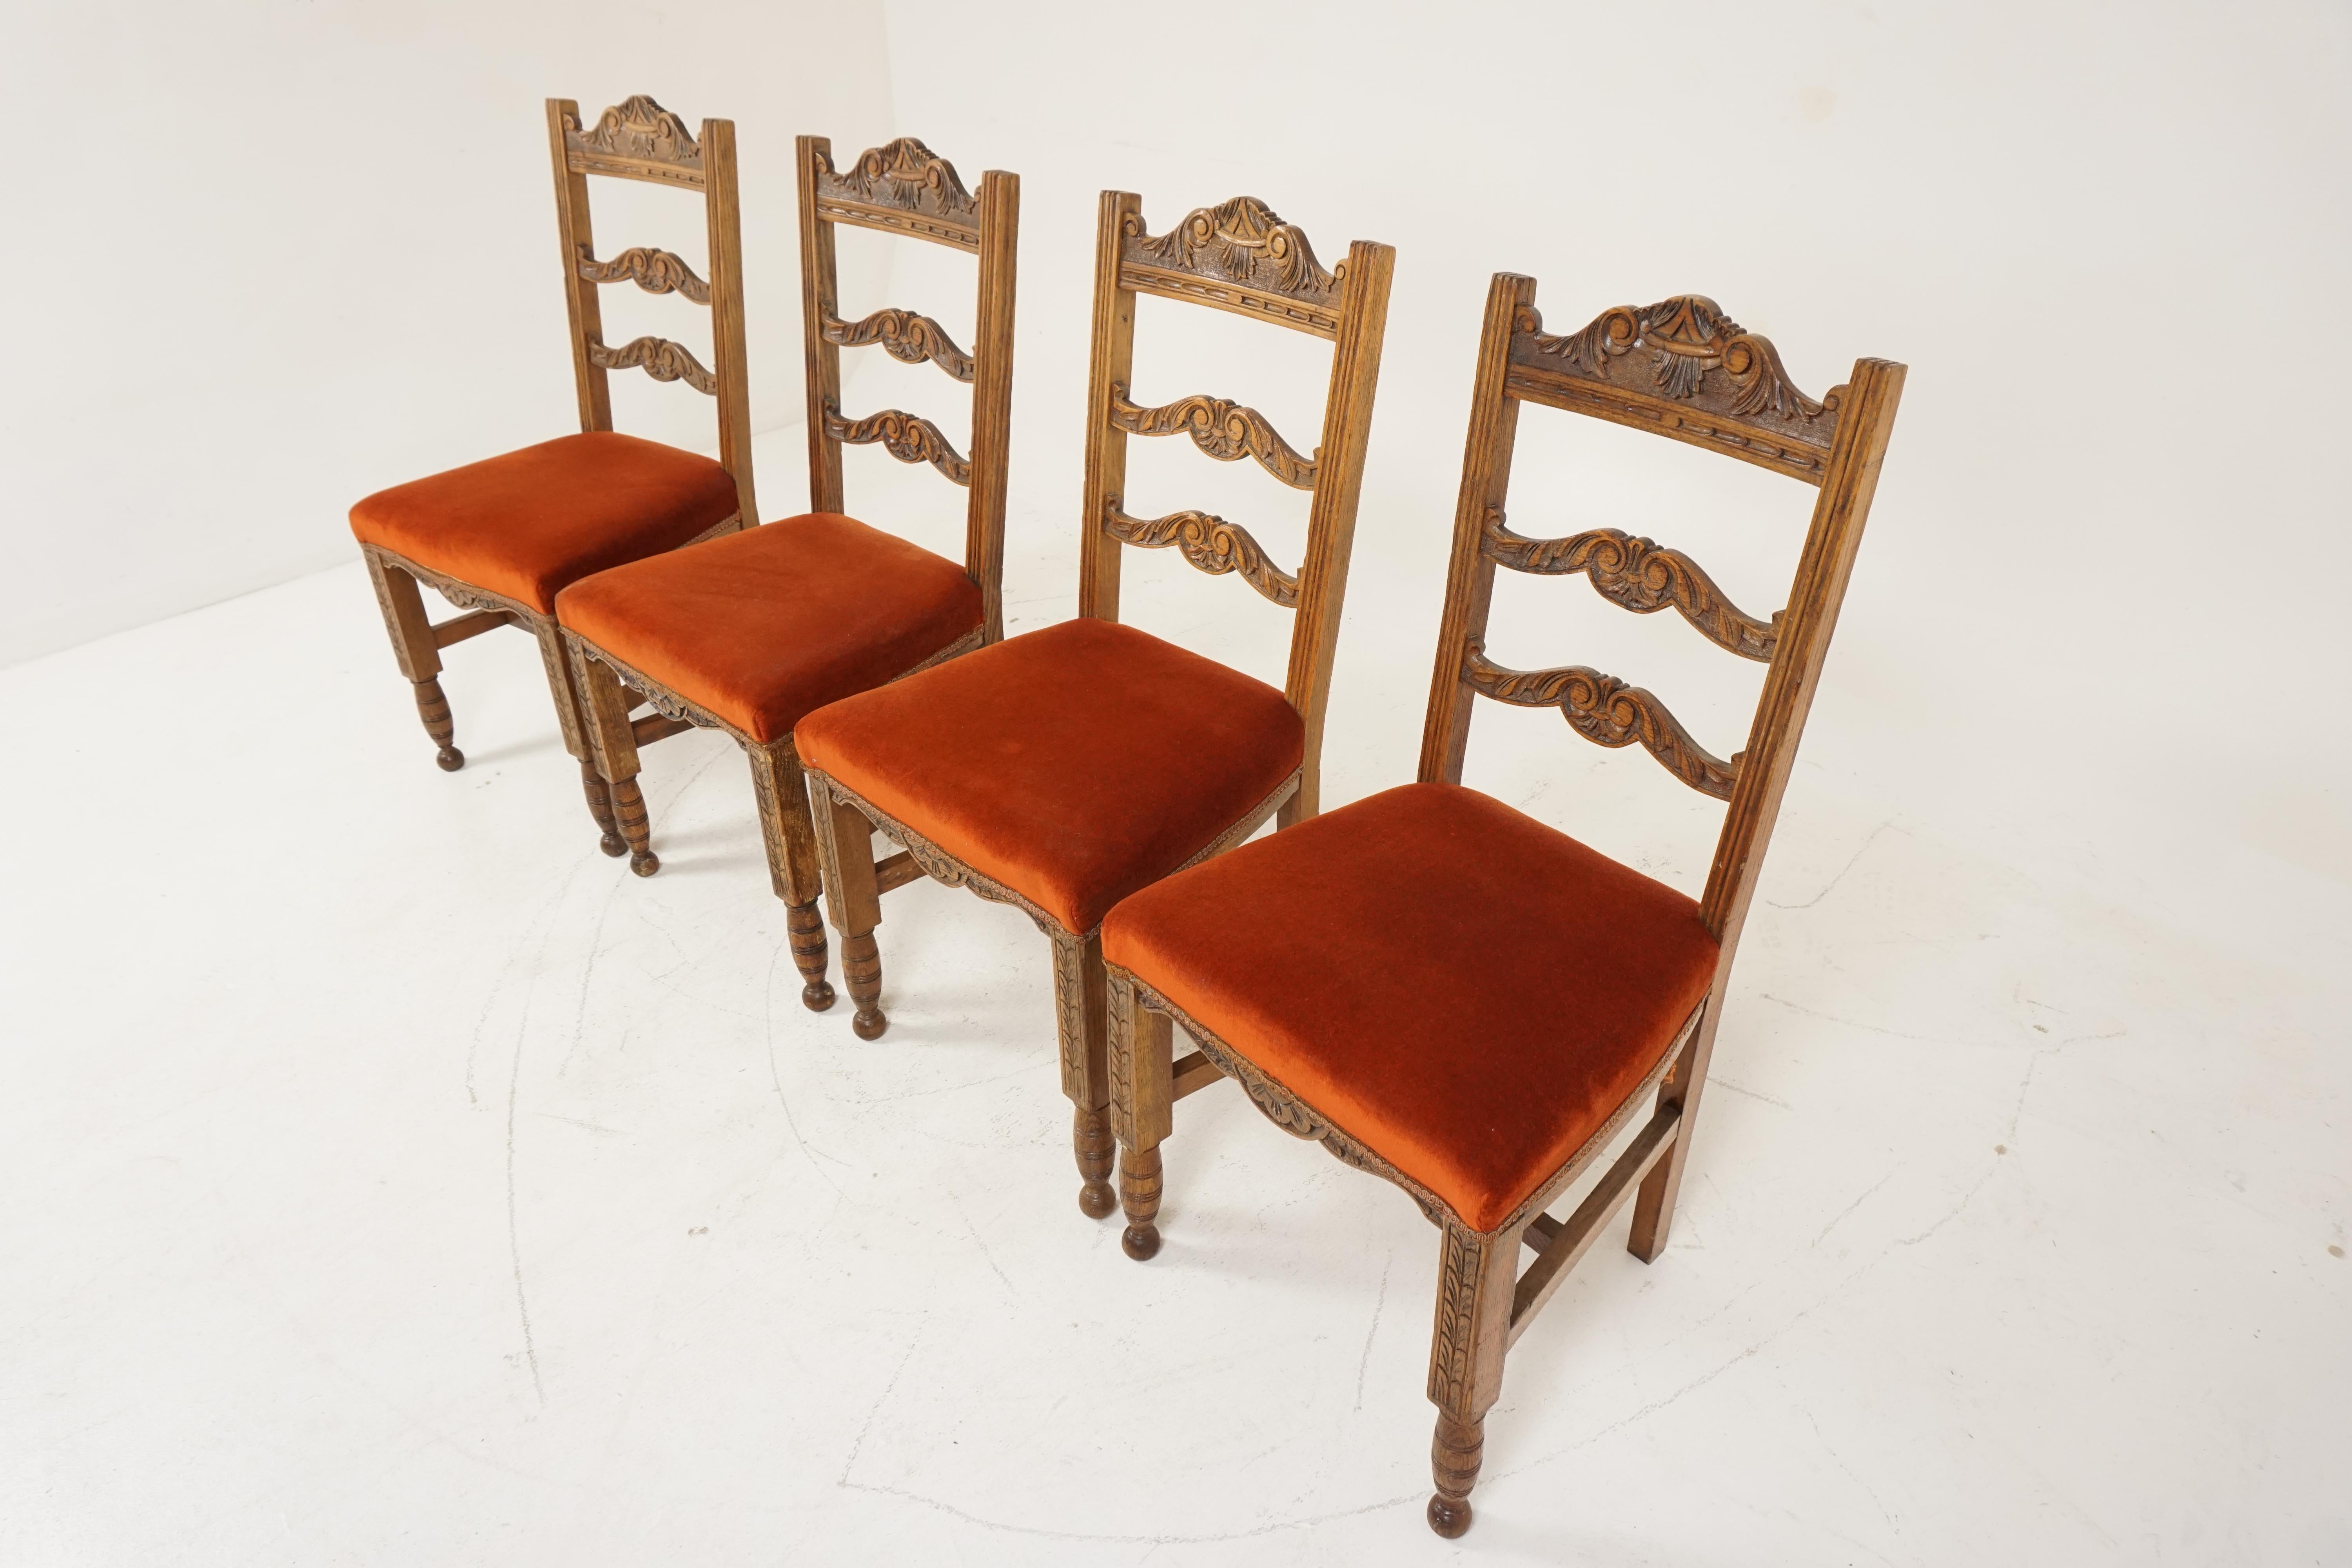 Four carved oak dining chairs, upholstered seats, Scotland 1920, B2754

Scotland 1920
Solid oak
Original finish
Three carved rails to the back
Upholstered seat below
Carved skirt to the front
All standing on carved turned legs
Connected by